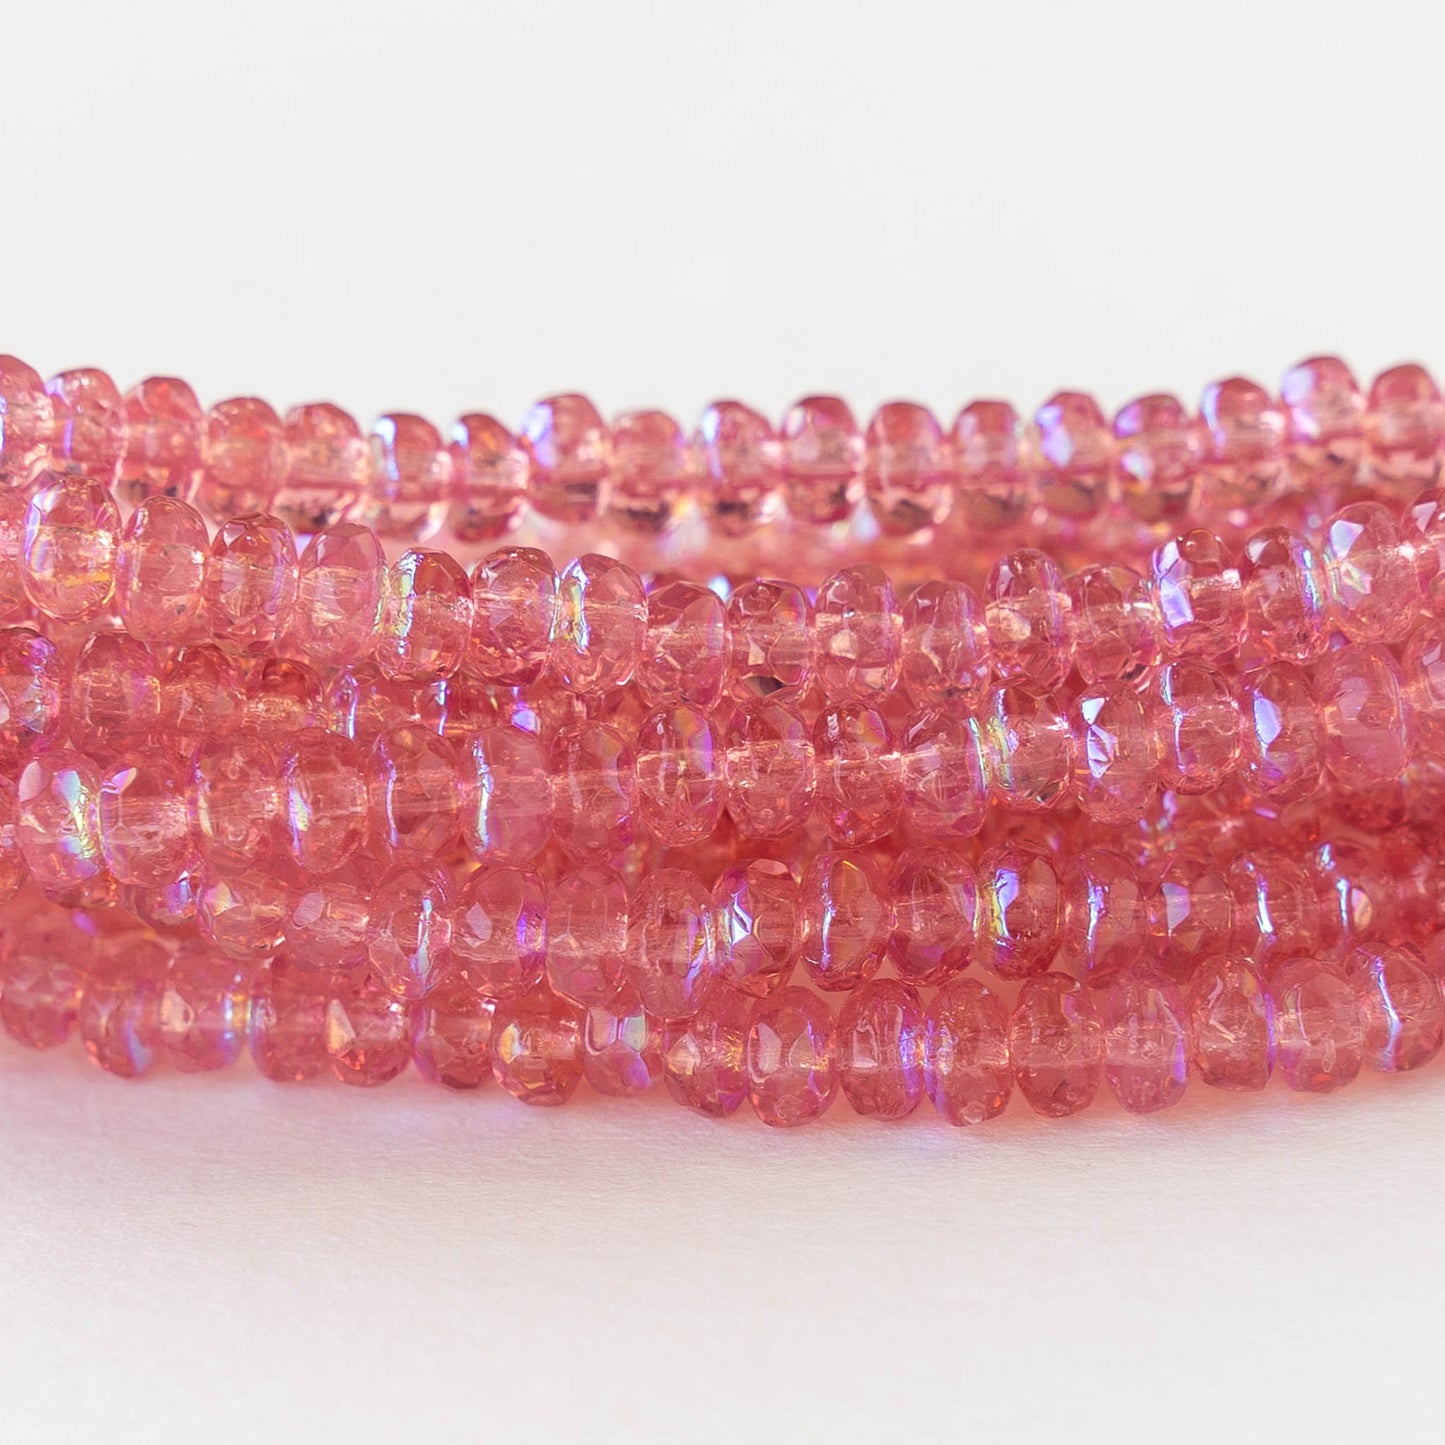 4mm Faceted Rondelle Beads - Light Pink AB - 50 beads